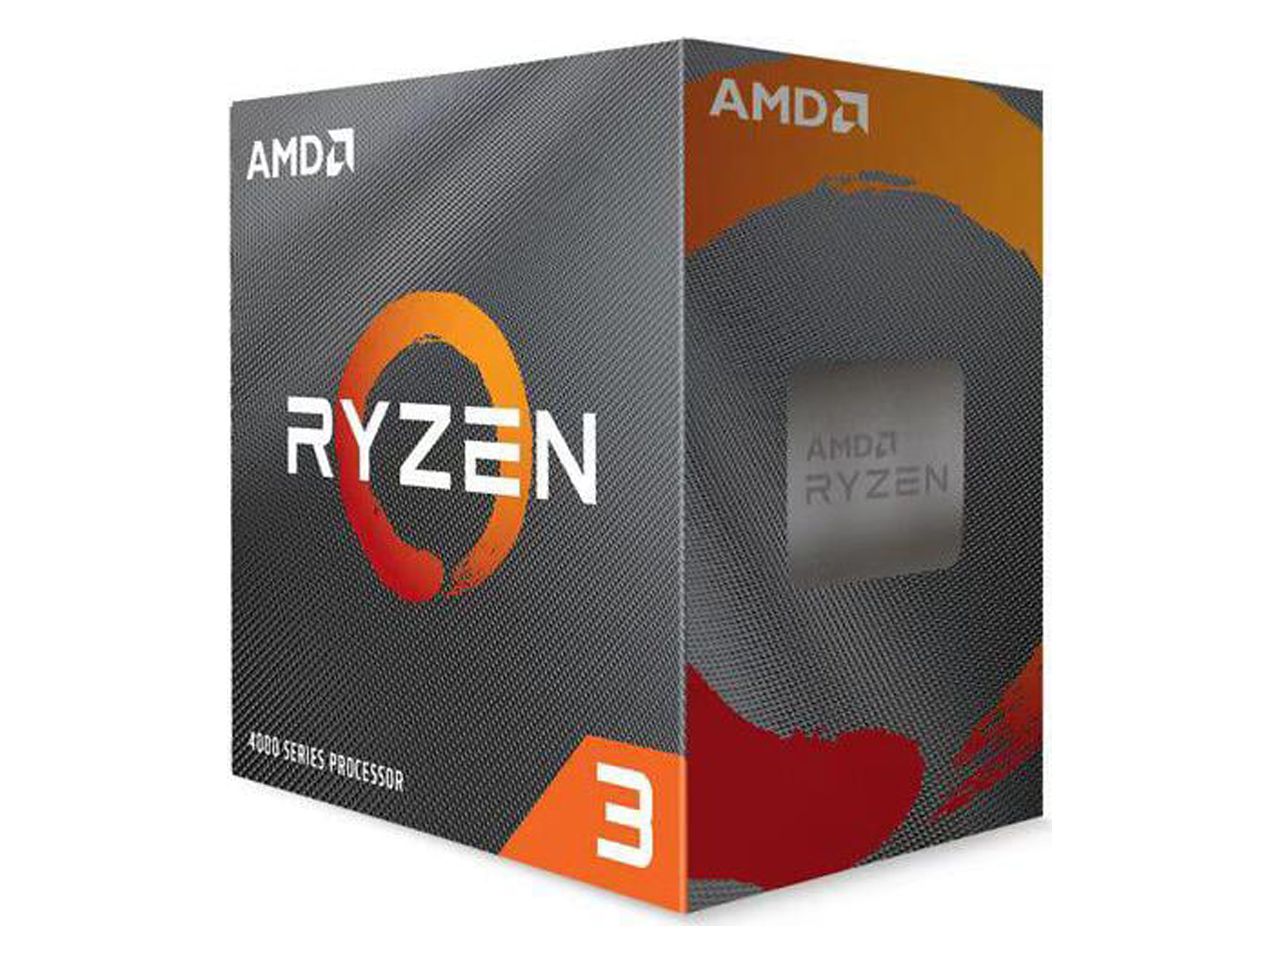 AMD Ryzen 3 4100 3.8Ghz 4-Core AM4 Processor with Wraith Stealth Cooler - 100-100000510BOX - image 1 of 10